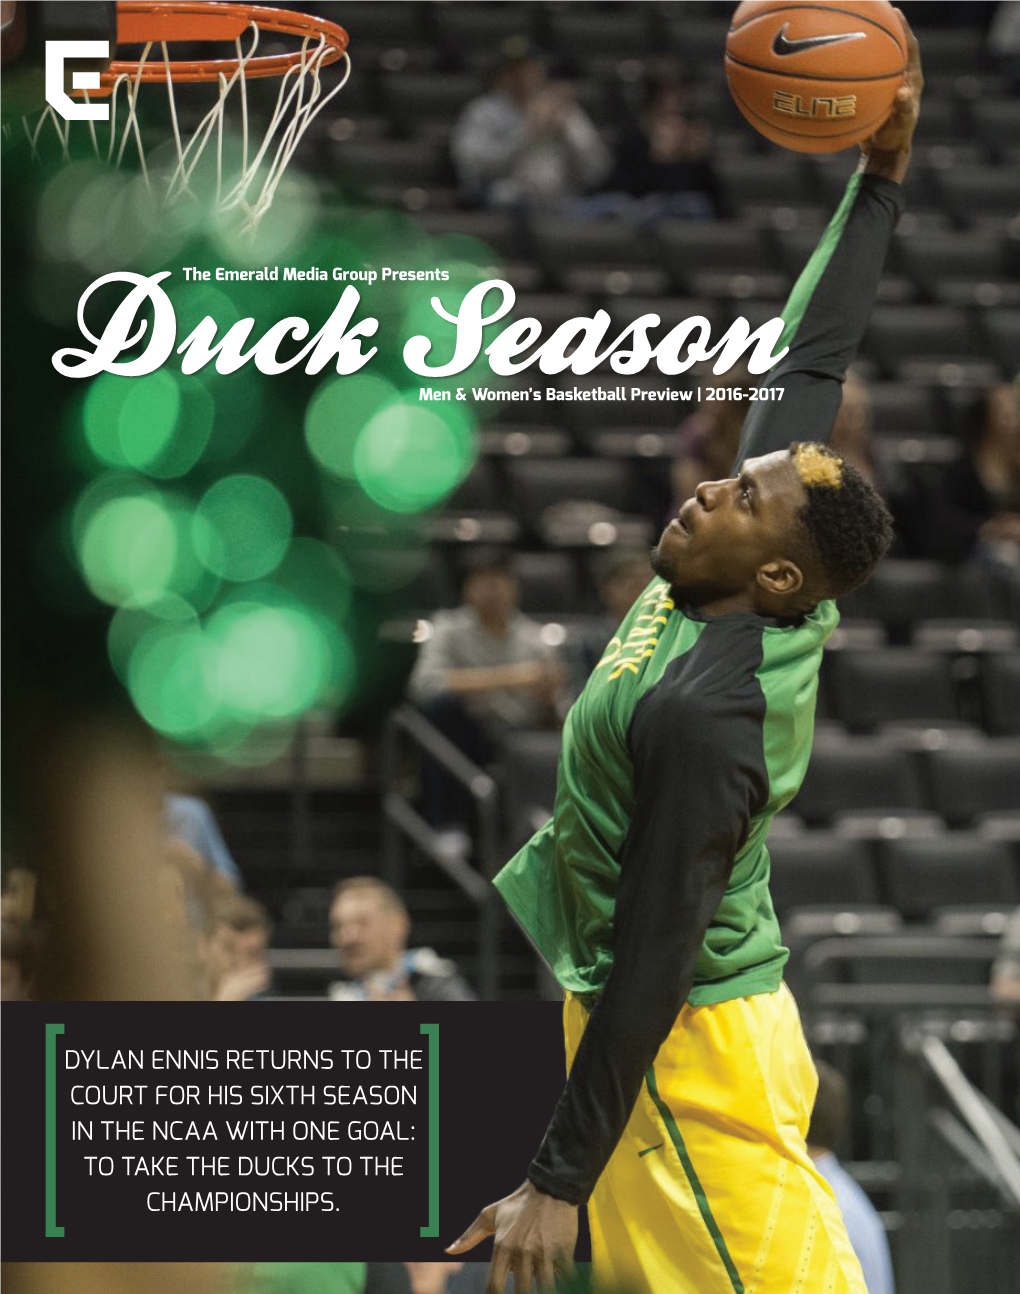 Dylan Ennis Returns to the Court for His Sixth Season in the Ncaa with One Goal: to Take the Ducks to the Championships